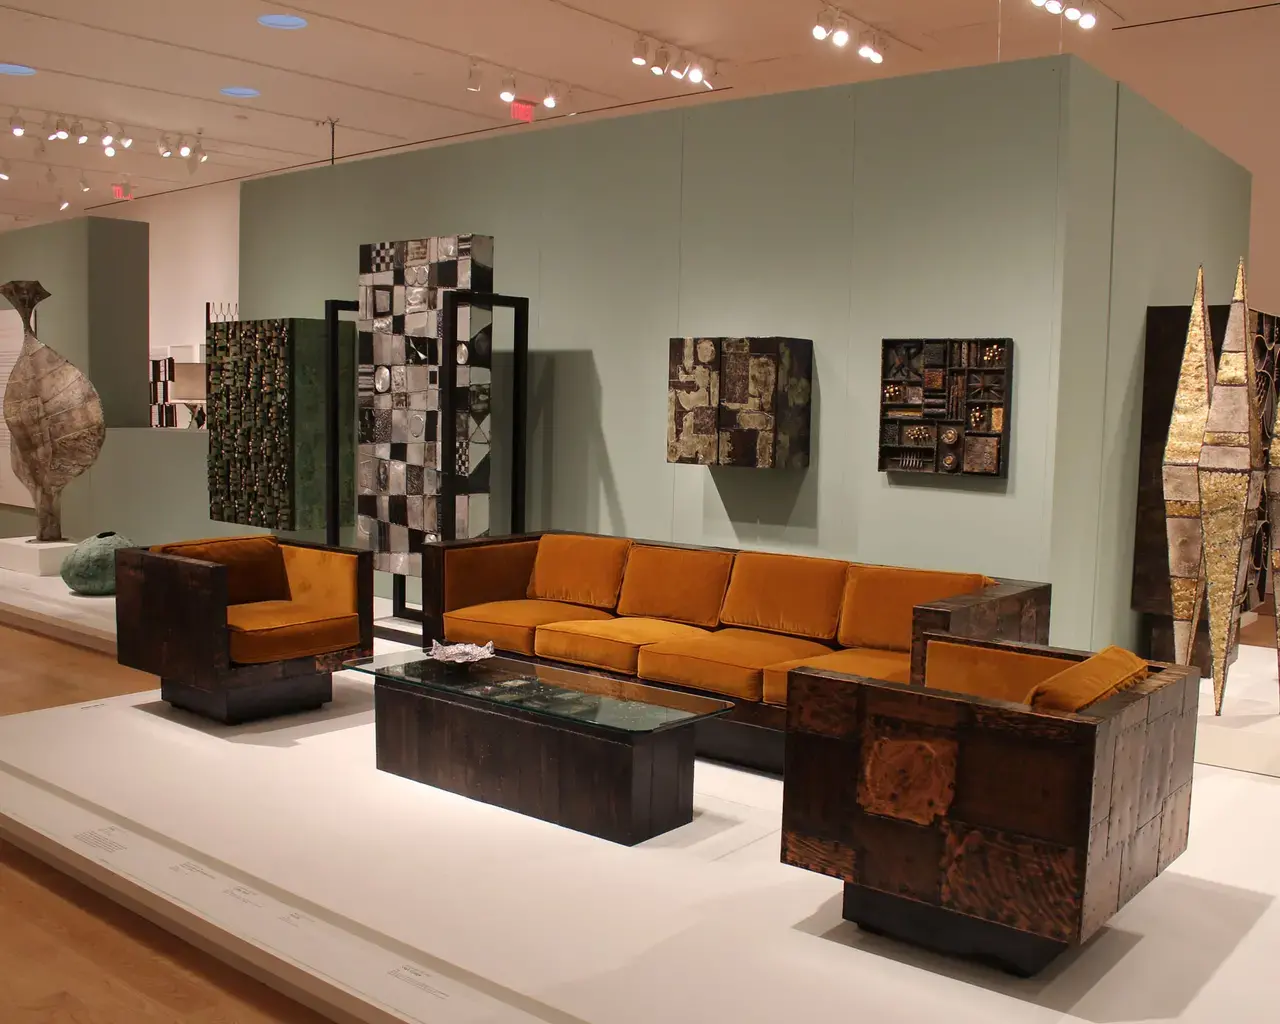 Installation shot from Paul Evans: Crossing Boundaries and Crafting Modernism at the James A. Michener Art Museum. Photo by Sean Wells.